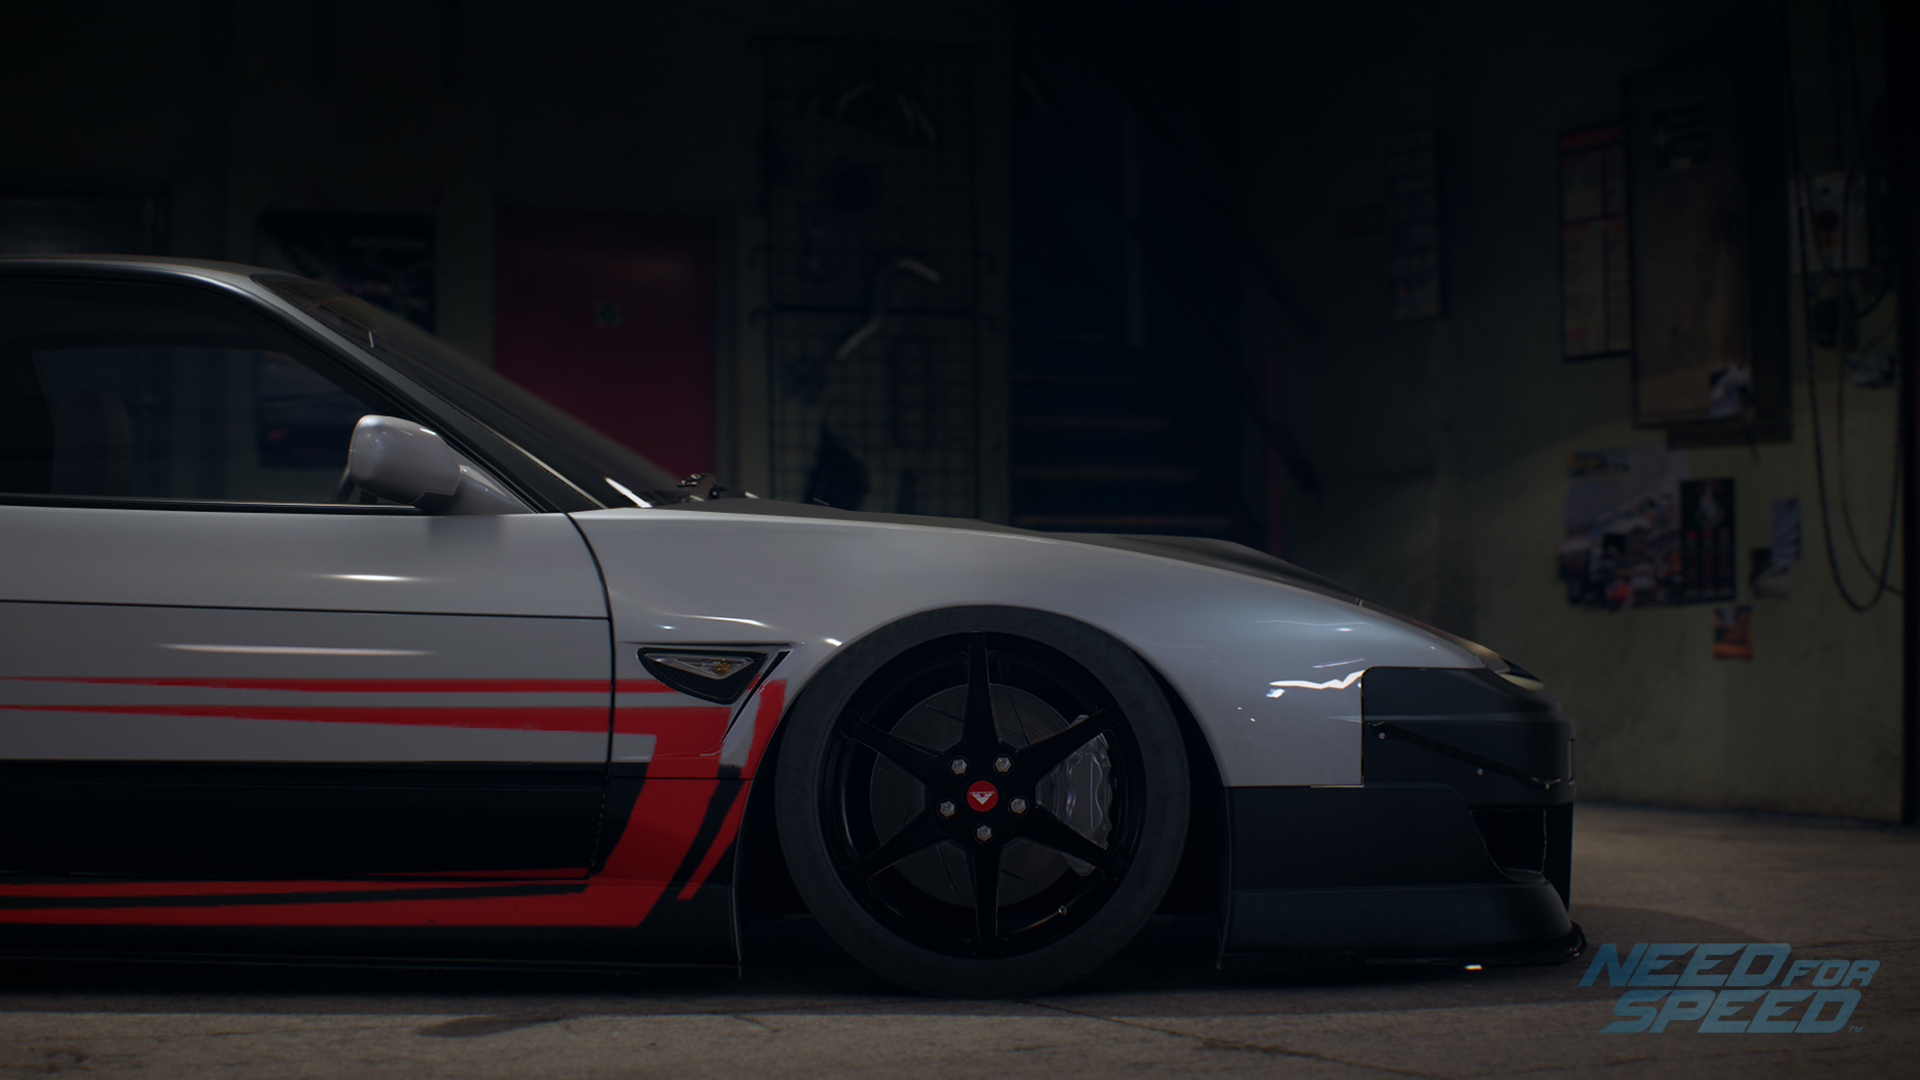 Nissan 180sx Type X - Hd Wallpapers Of Need For Speed Underground 3 , HD Wallpaper & Backgrounds